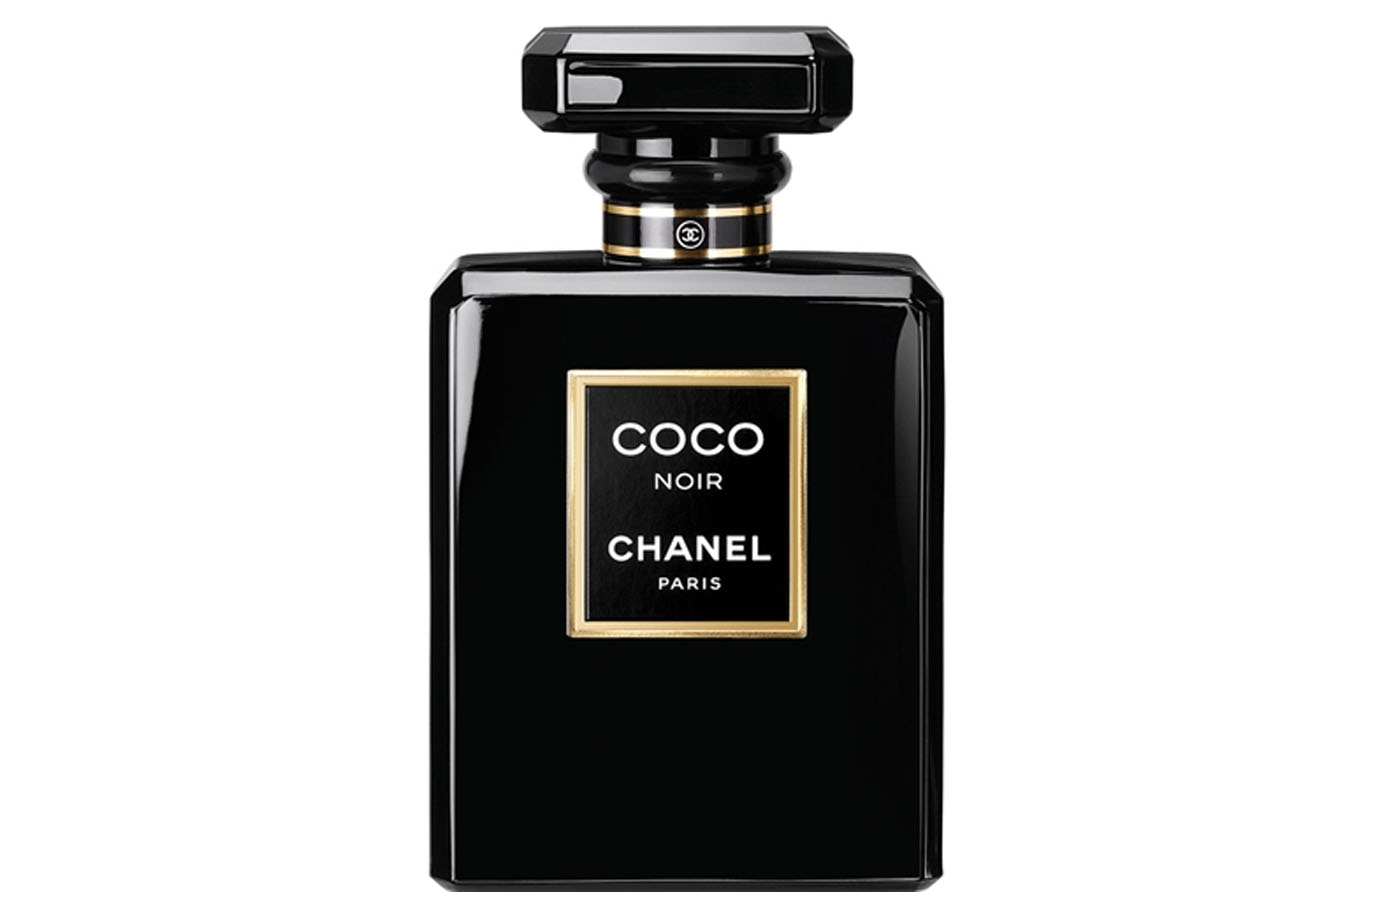 Coco Noir Perfume by Chanel.